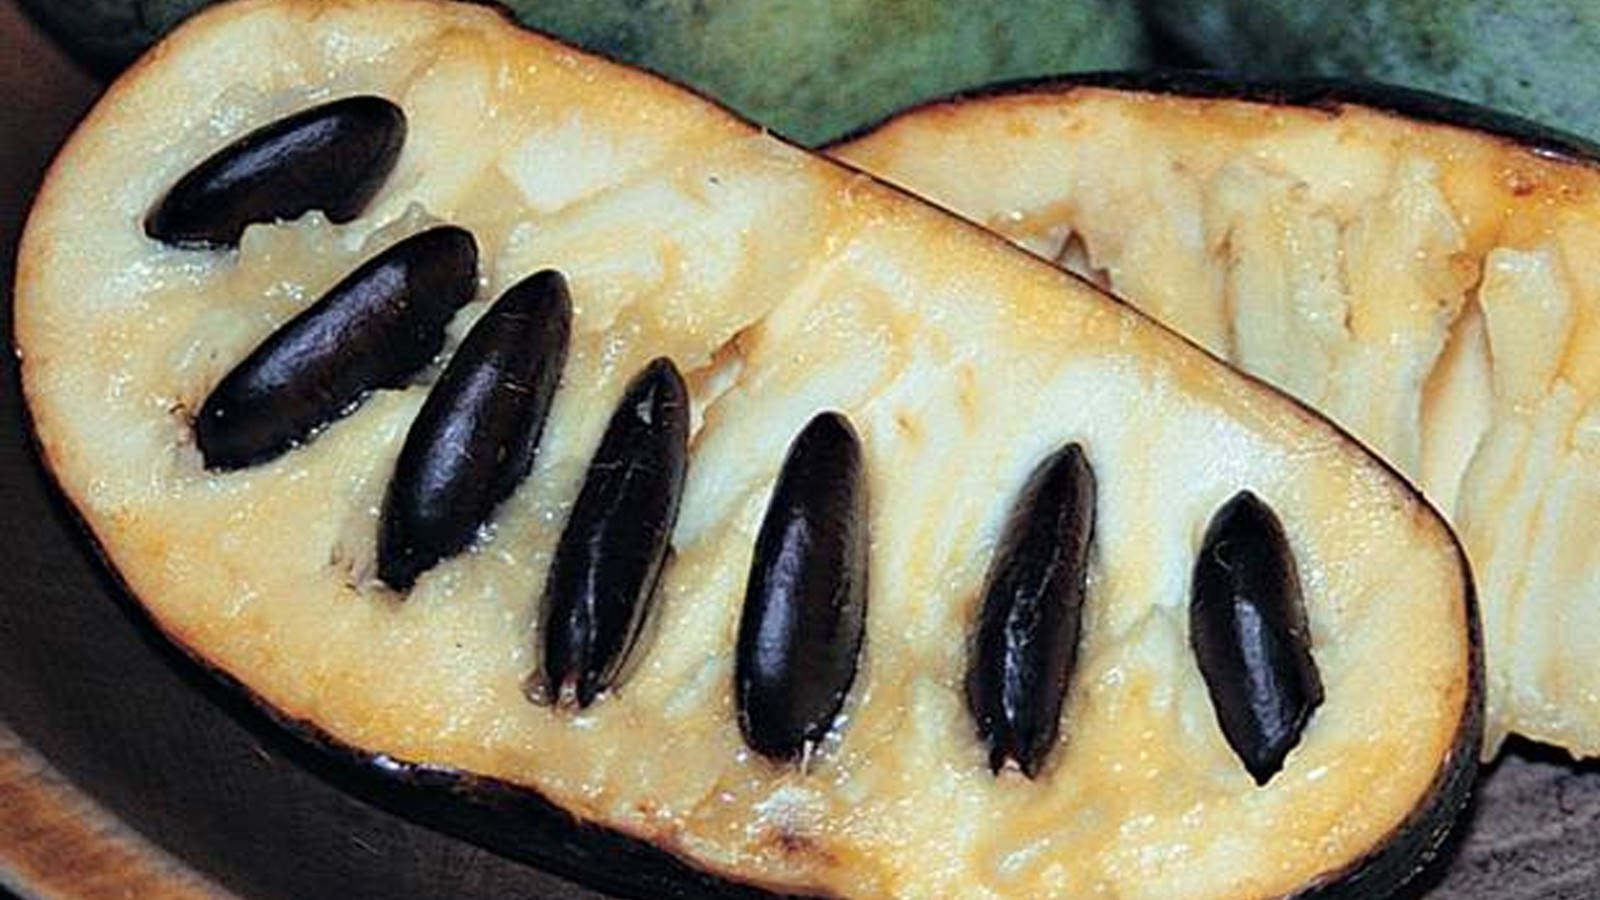 Caption: Vibrant Pawpaw Fruit with Black Seeds Wallpaper